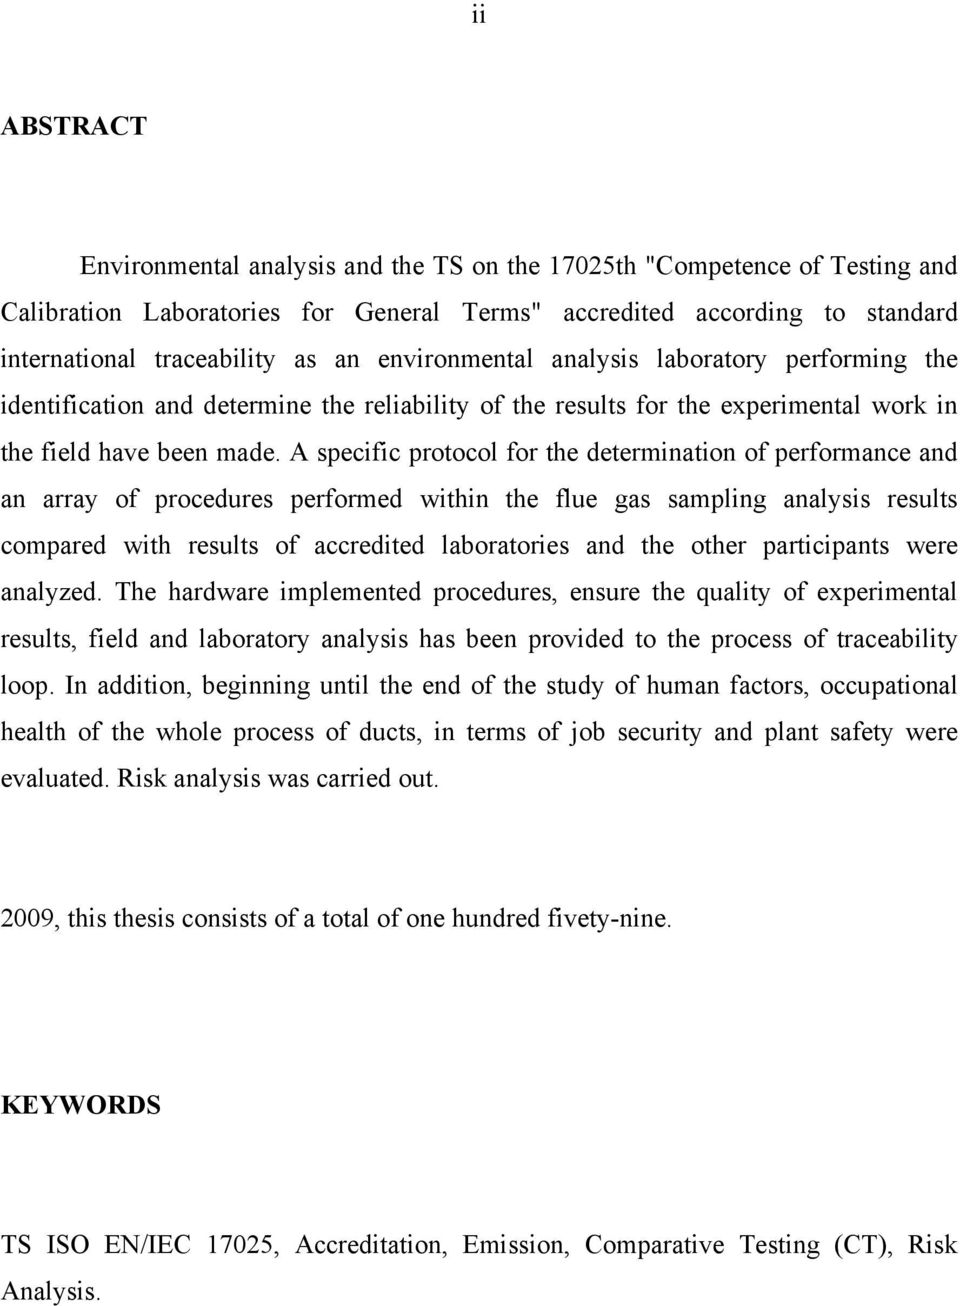 A specific protocol for the determination of performance and an array of procedures performed within the flue gas sampling analysis results compared with results of accredited laboratories and the